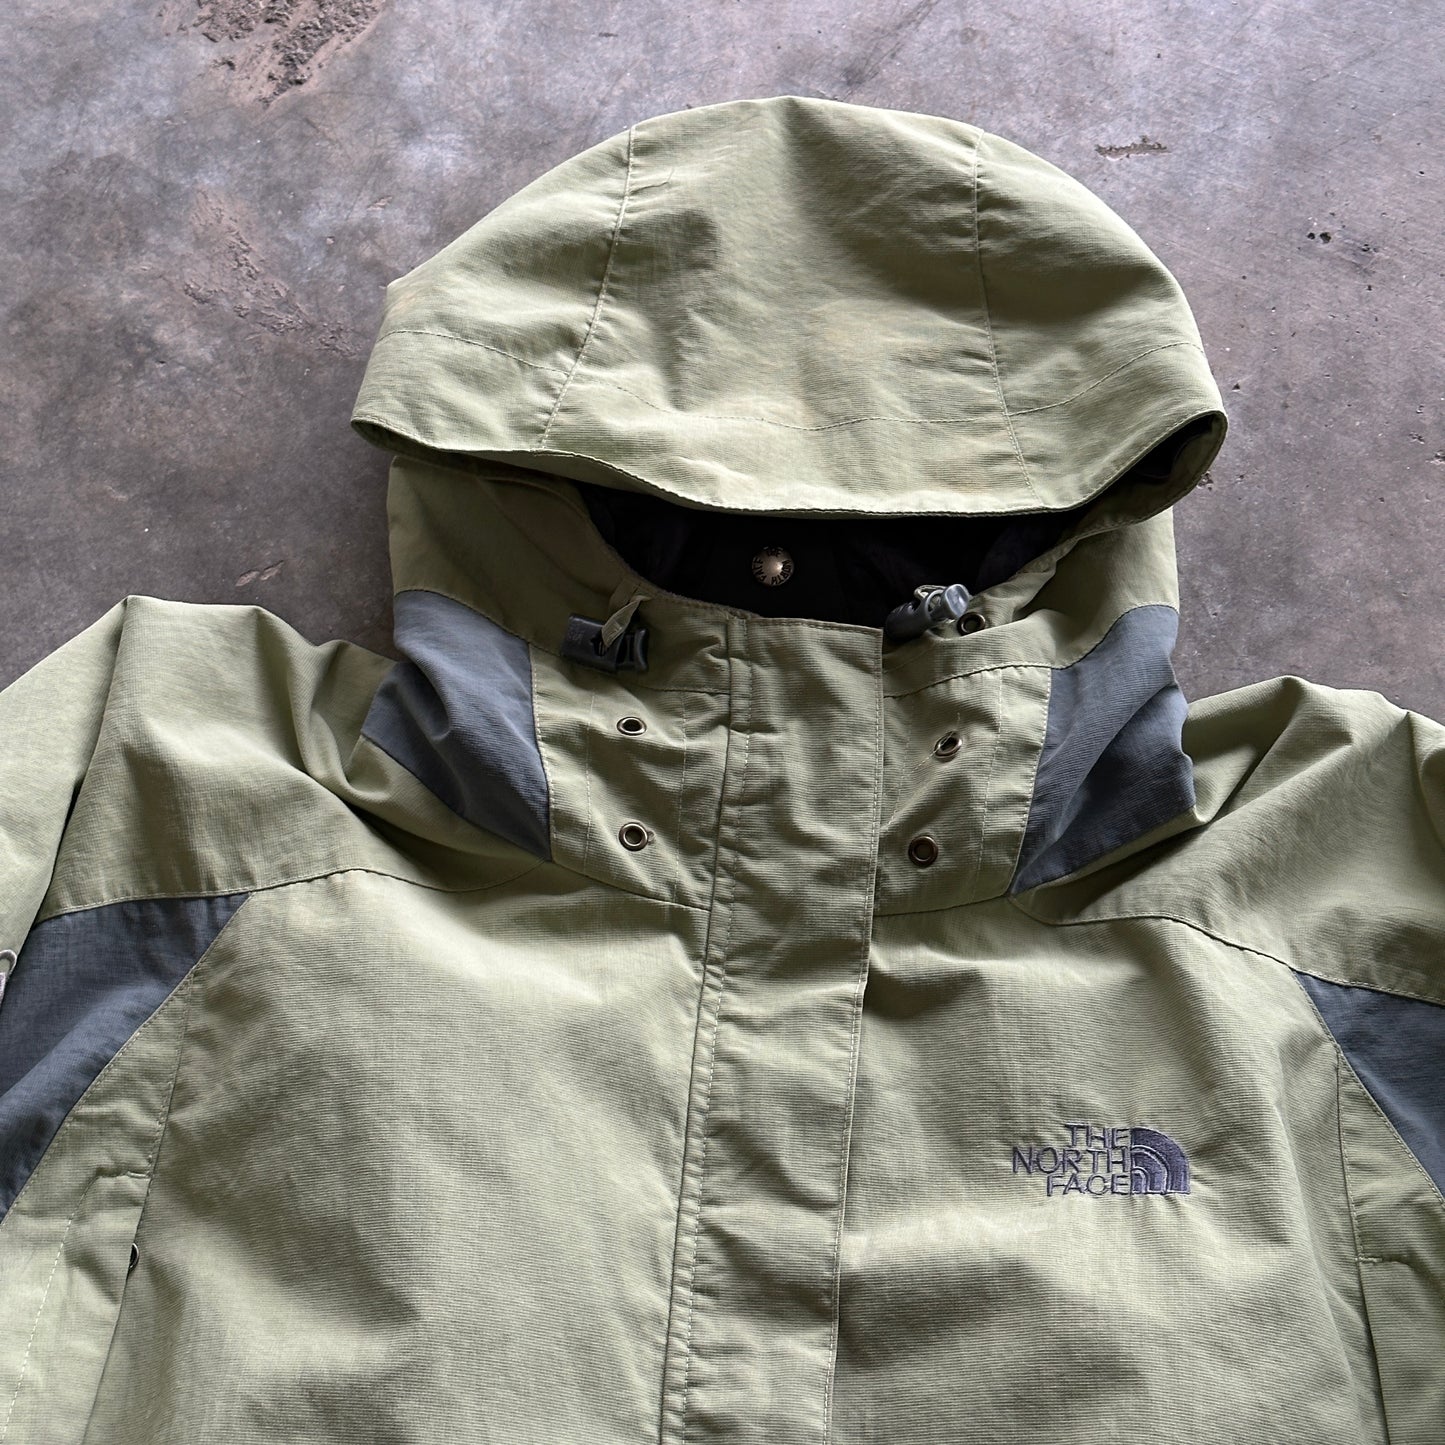 The North Face "HyVent" Full-Zip Jacket